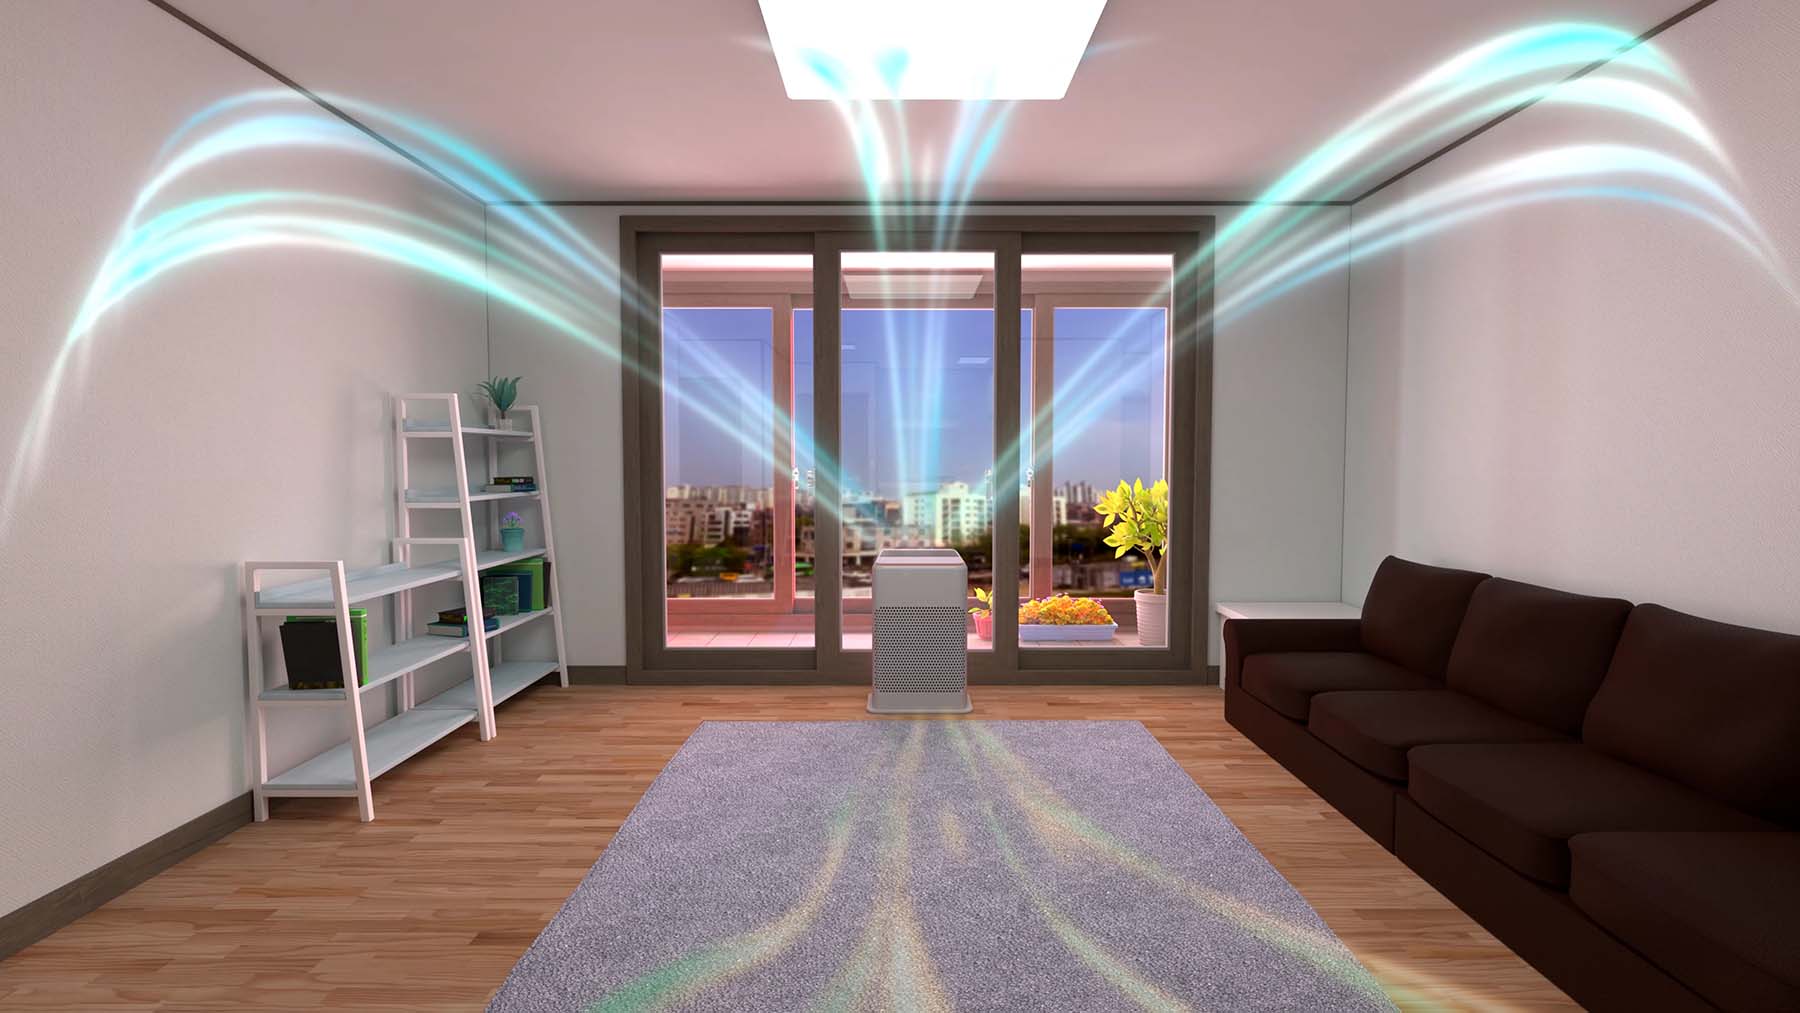 Rendering of an air cleaner circulating clean air in a condo.